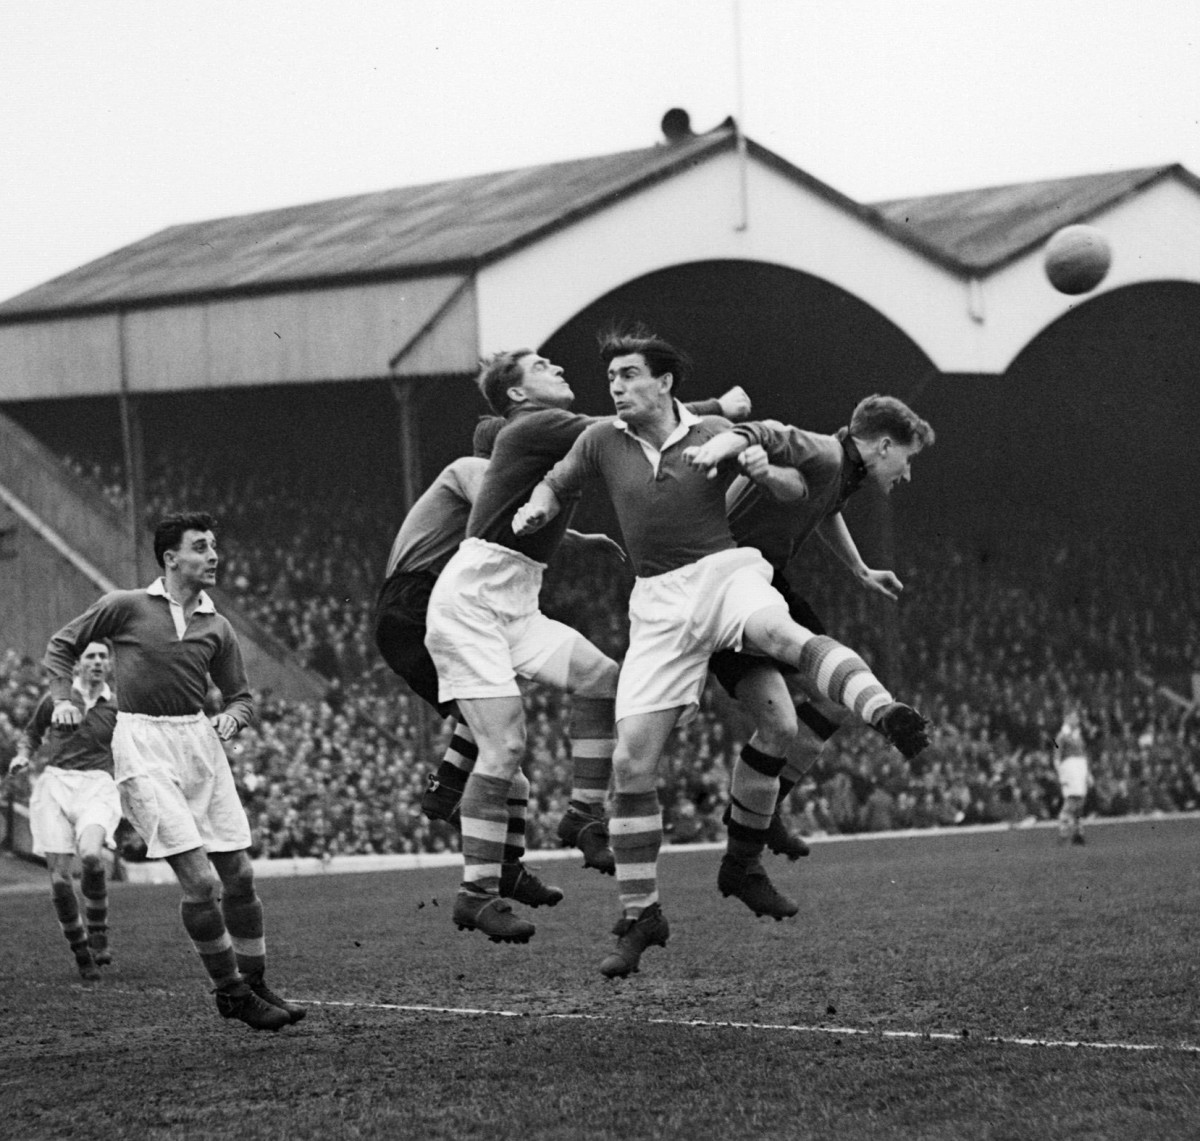 21st November 1953: Charlton Athletic goalkeeper Sam Bartram is assisted by his centre half Derek Ufton when he punches clear from a shot by Wolves centre forward Swinbourne during a match at the Valley. (Photo by Ron Case/Keystone/Getty Images)